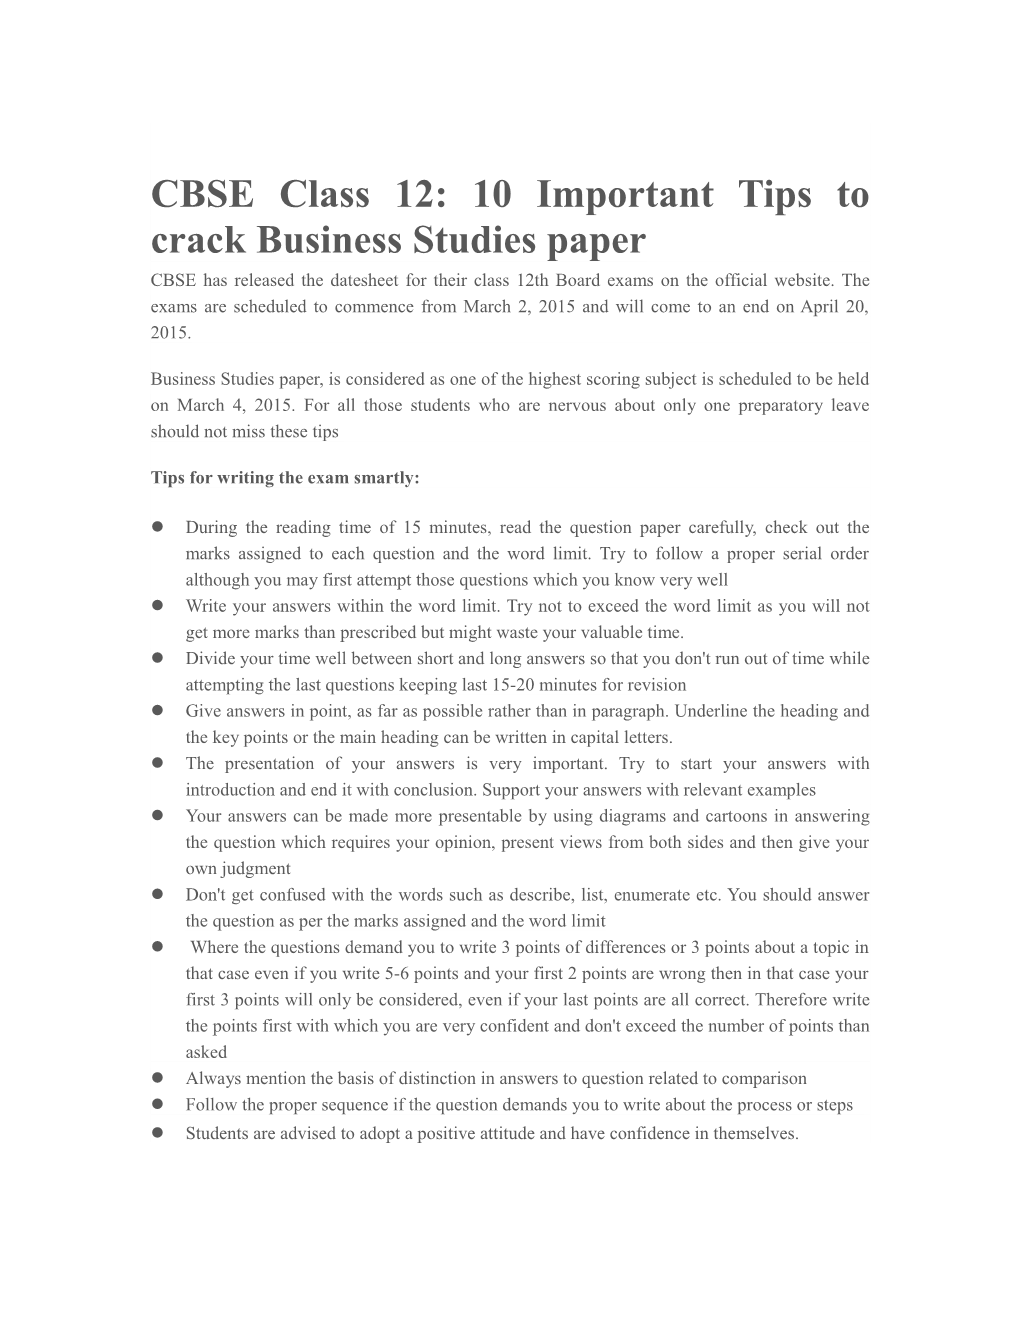 CBSE Class 12: 10 Important Tips to Crack Business Studies Paper